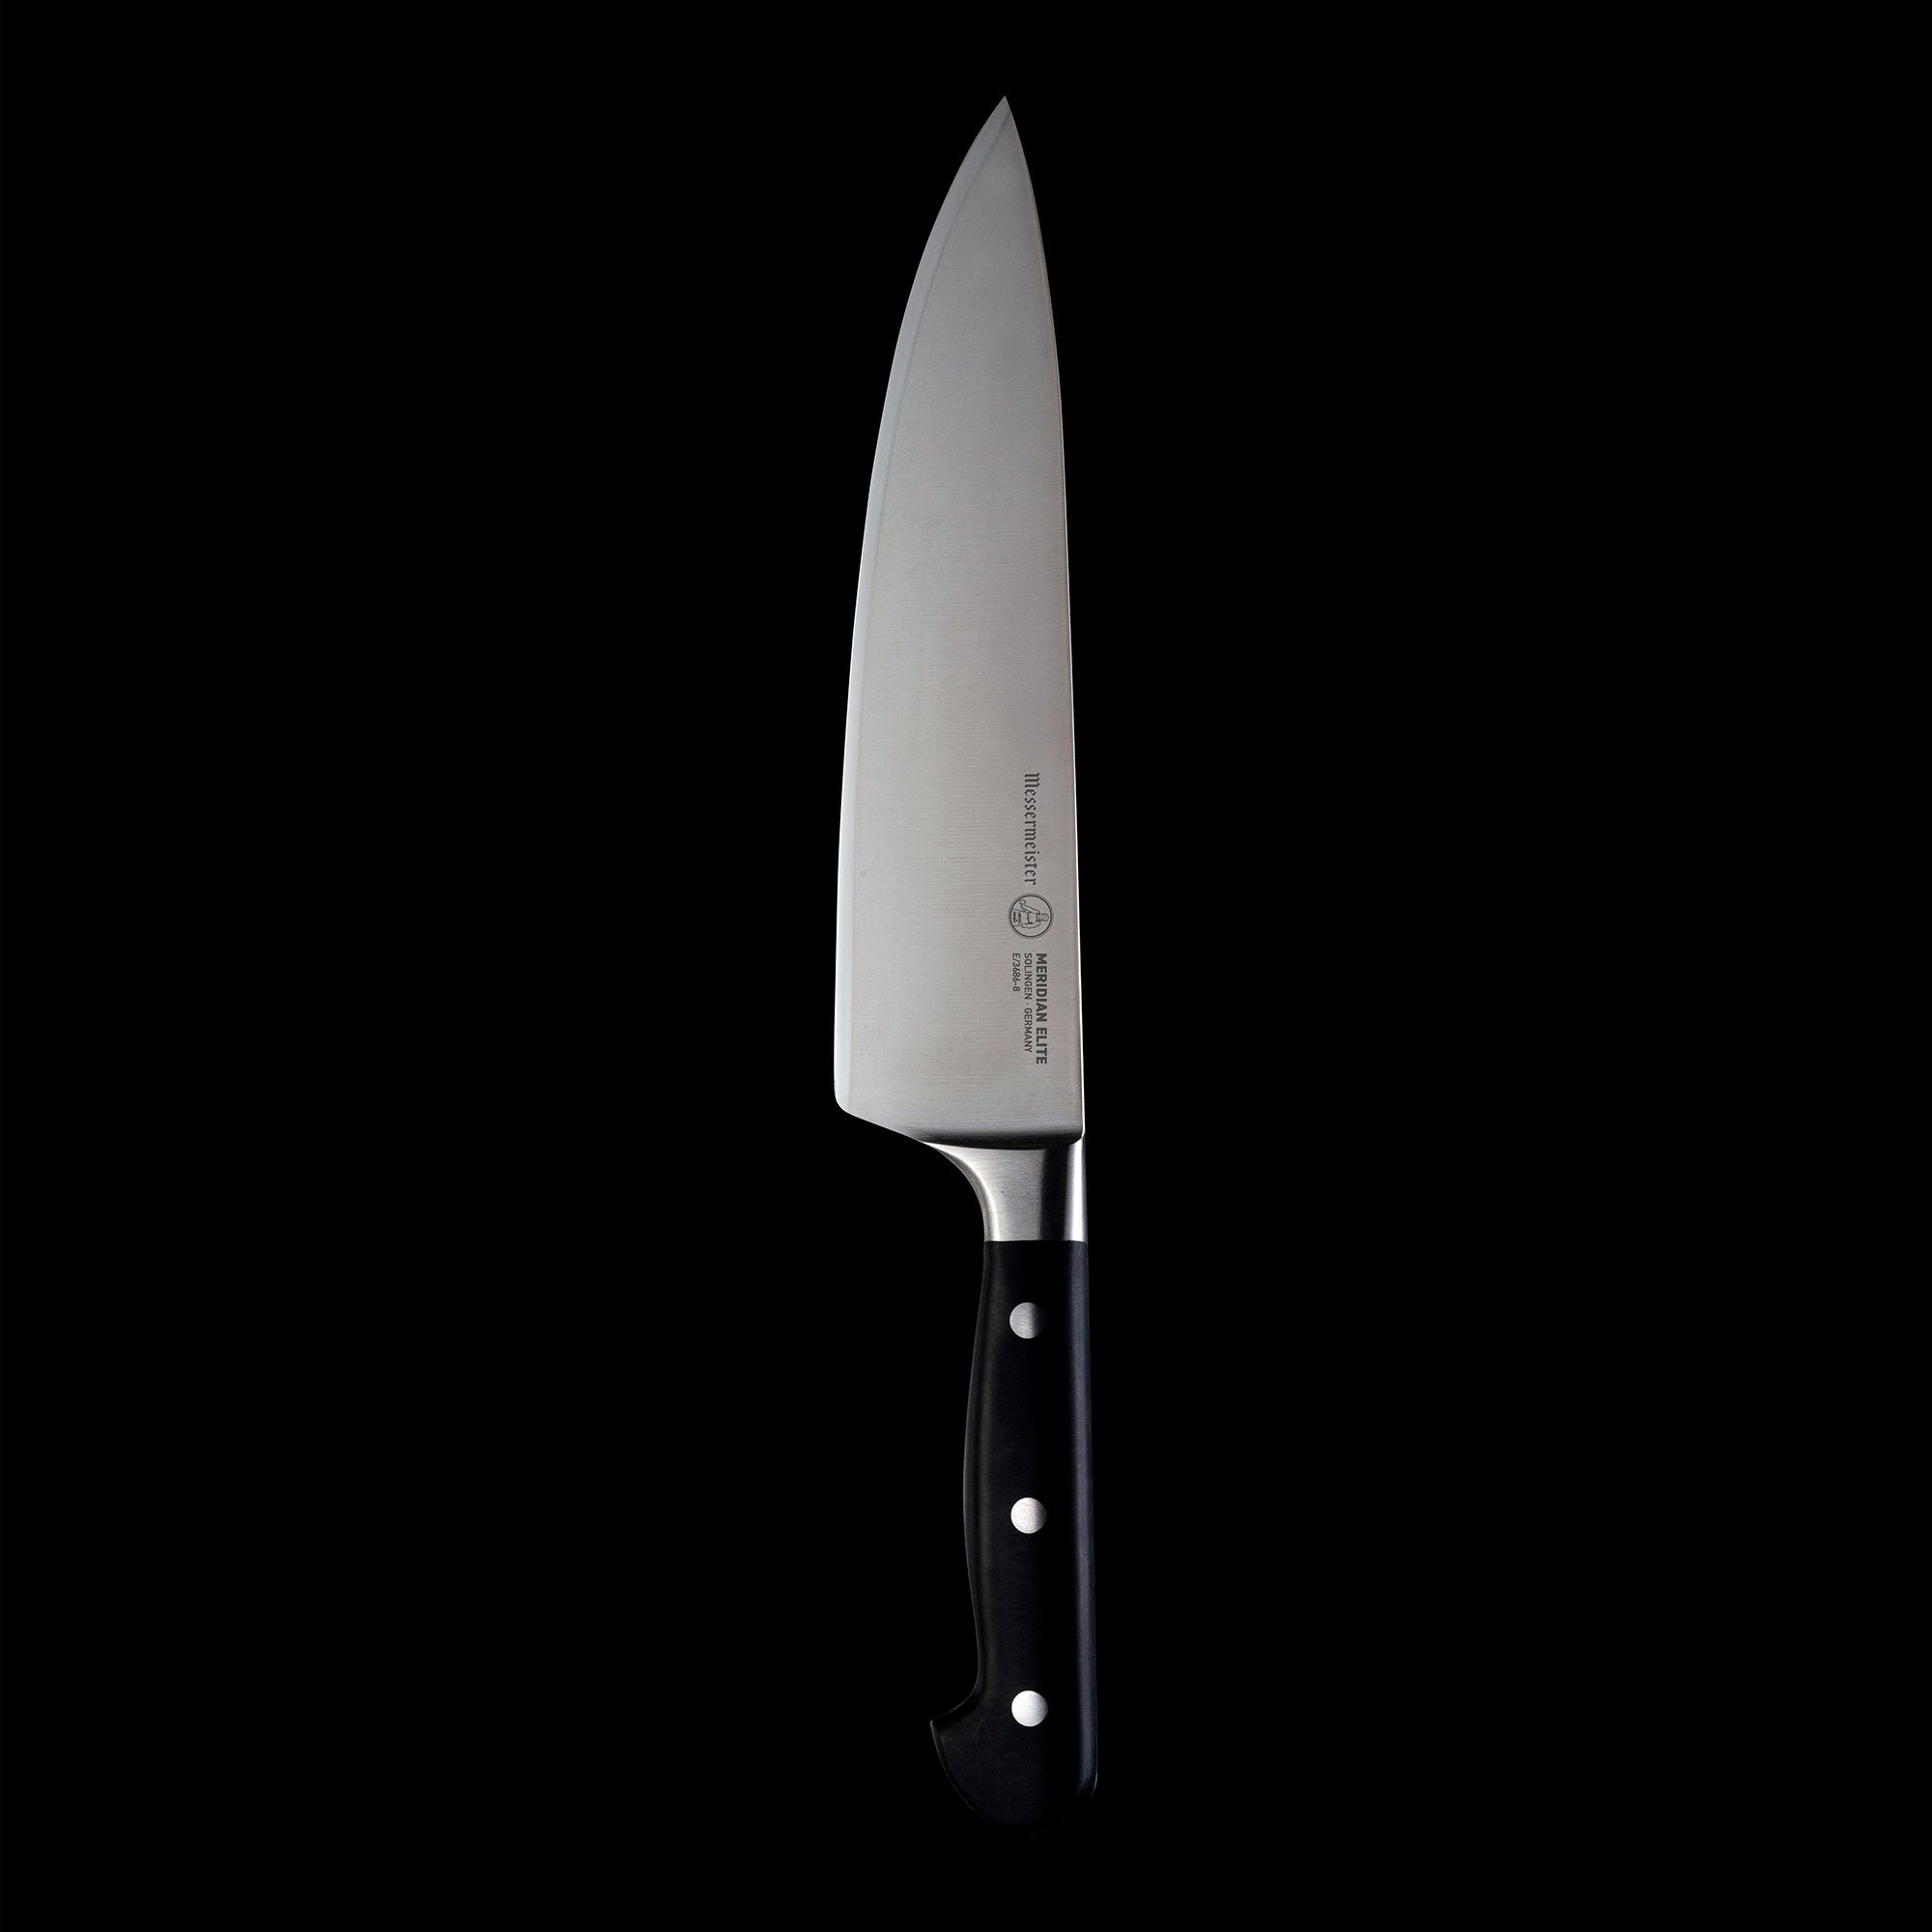 Partner content: Looking sharp with Tramontina knives and cutlery - Eat Out